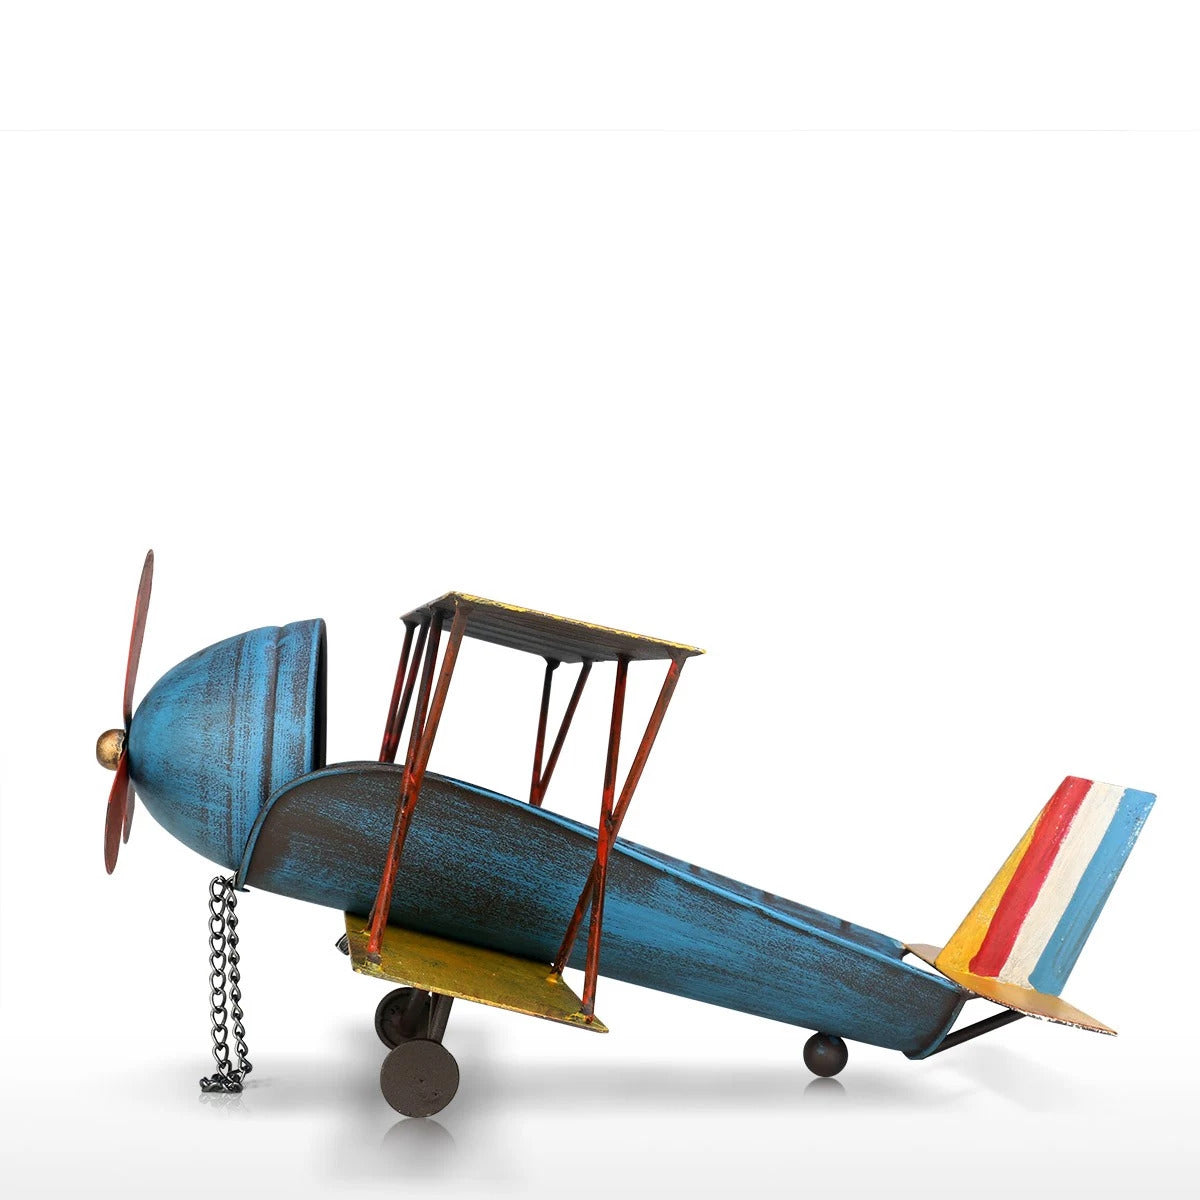 Airplane Toys and Figurines With Single and Countertop Wine Rack